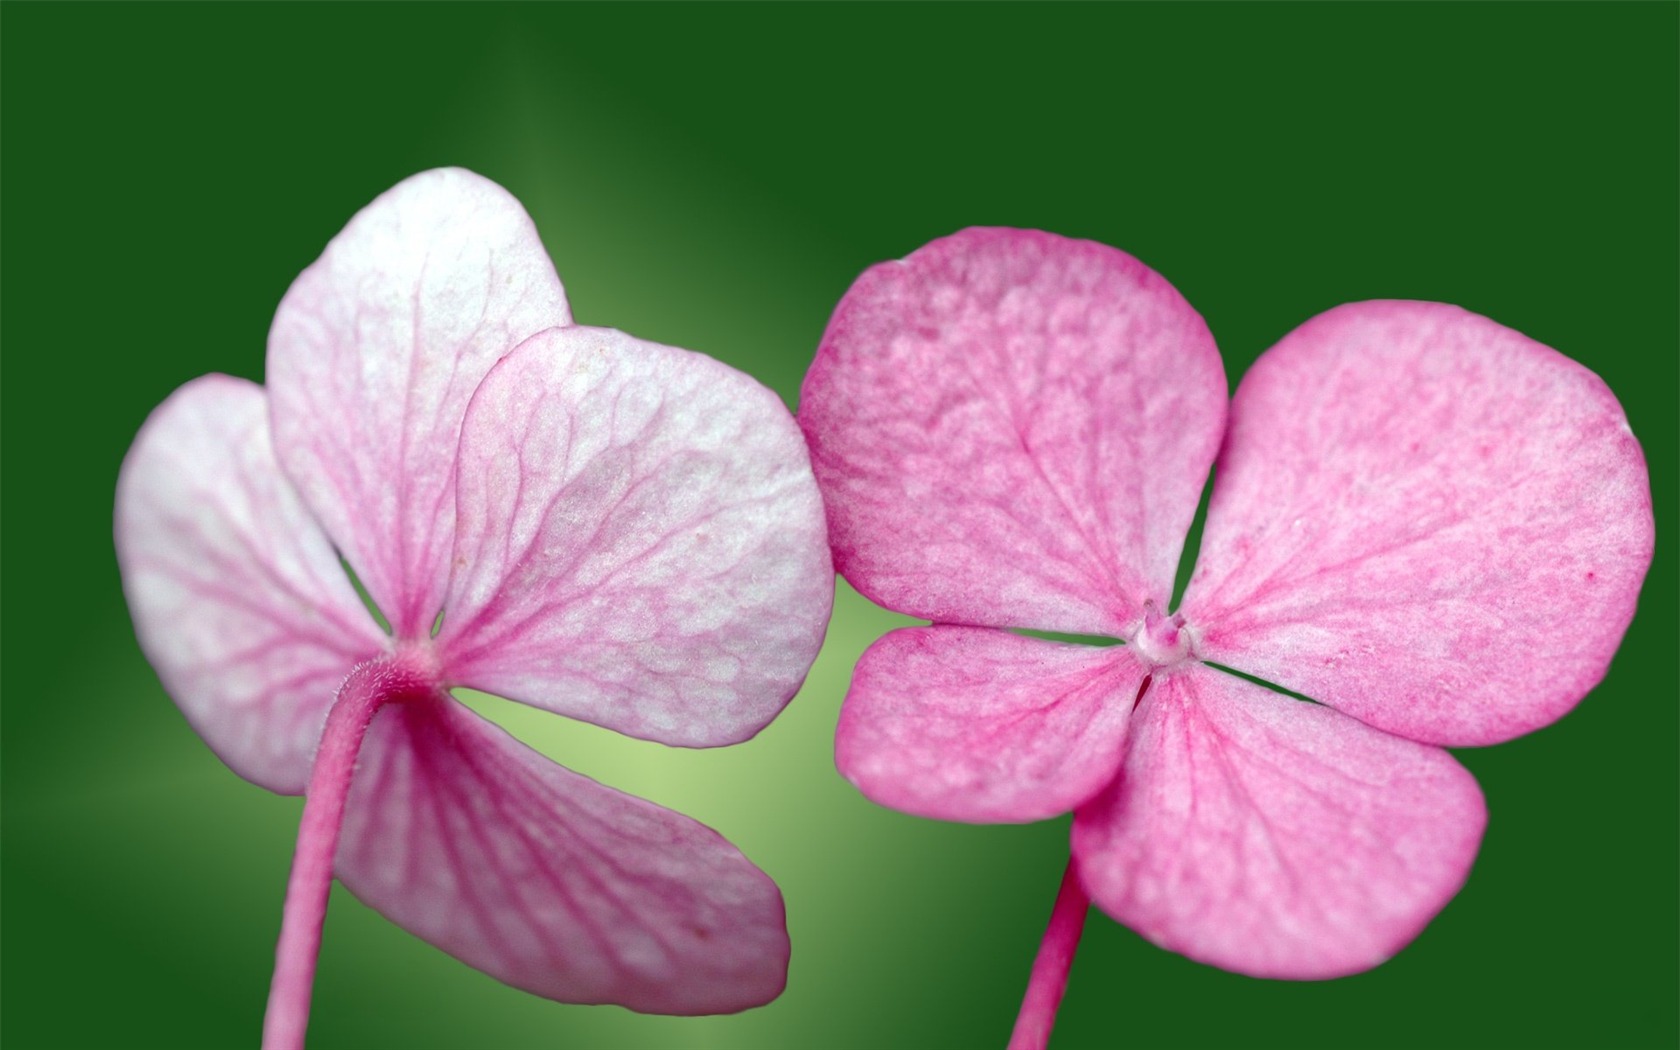 Pairs of flowers and green leaves wallpaper (1) #1 - 1680x1050